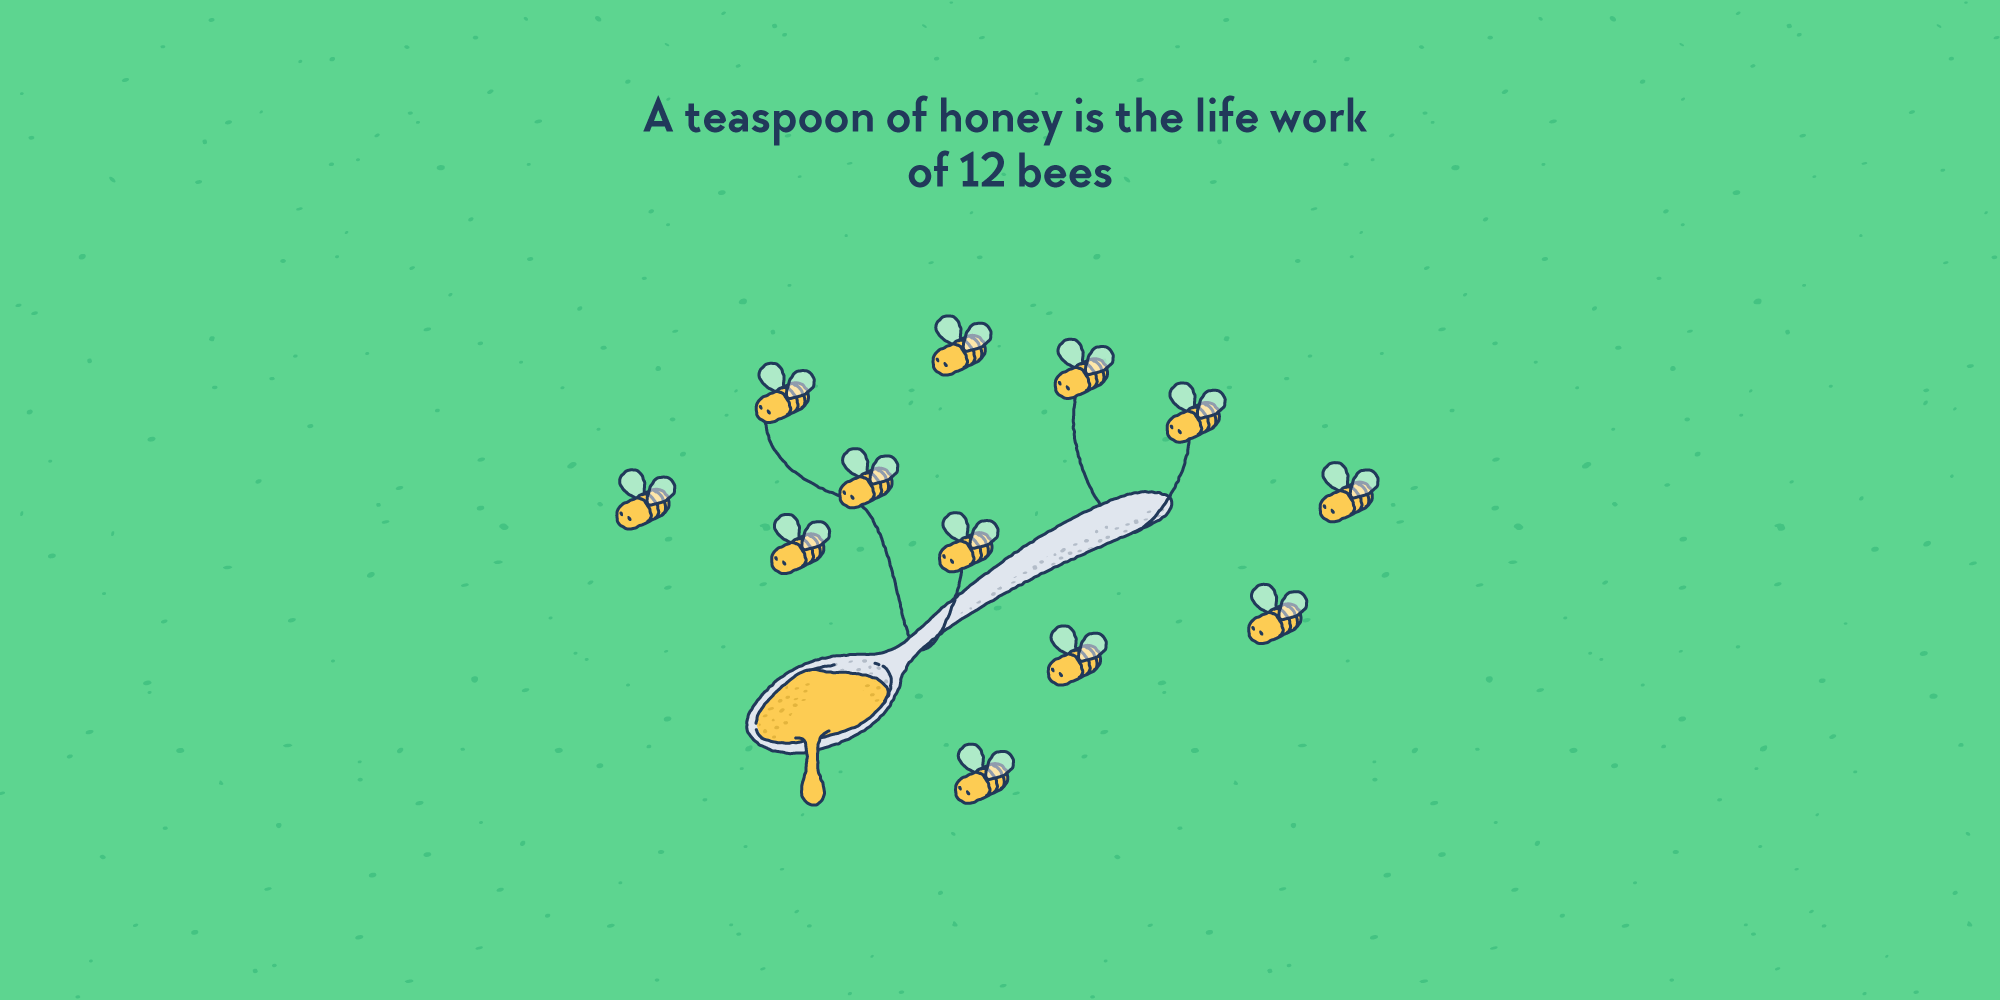 A teaspoon carried by 12 bees